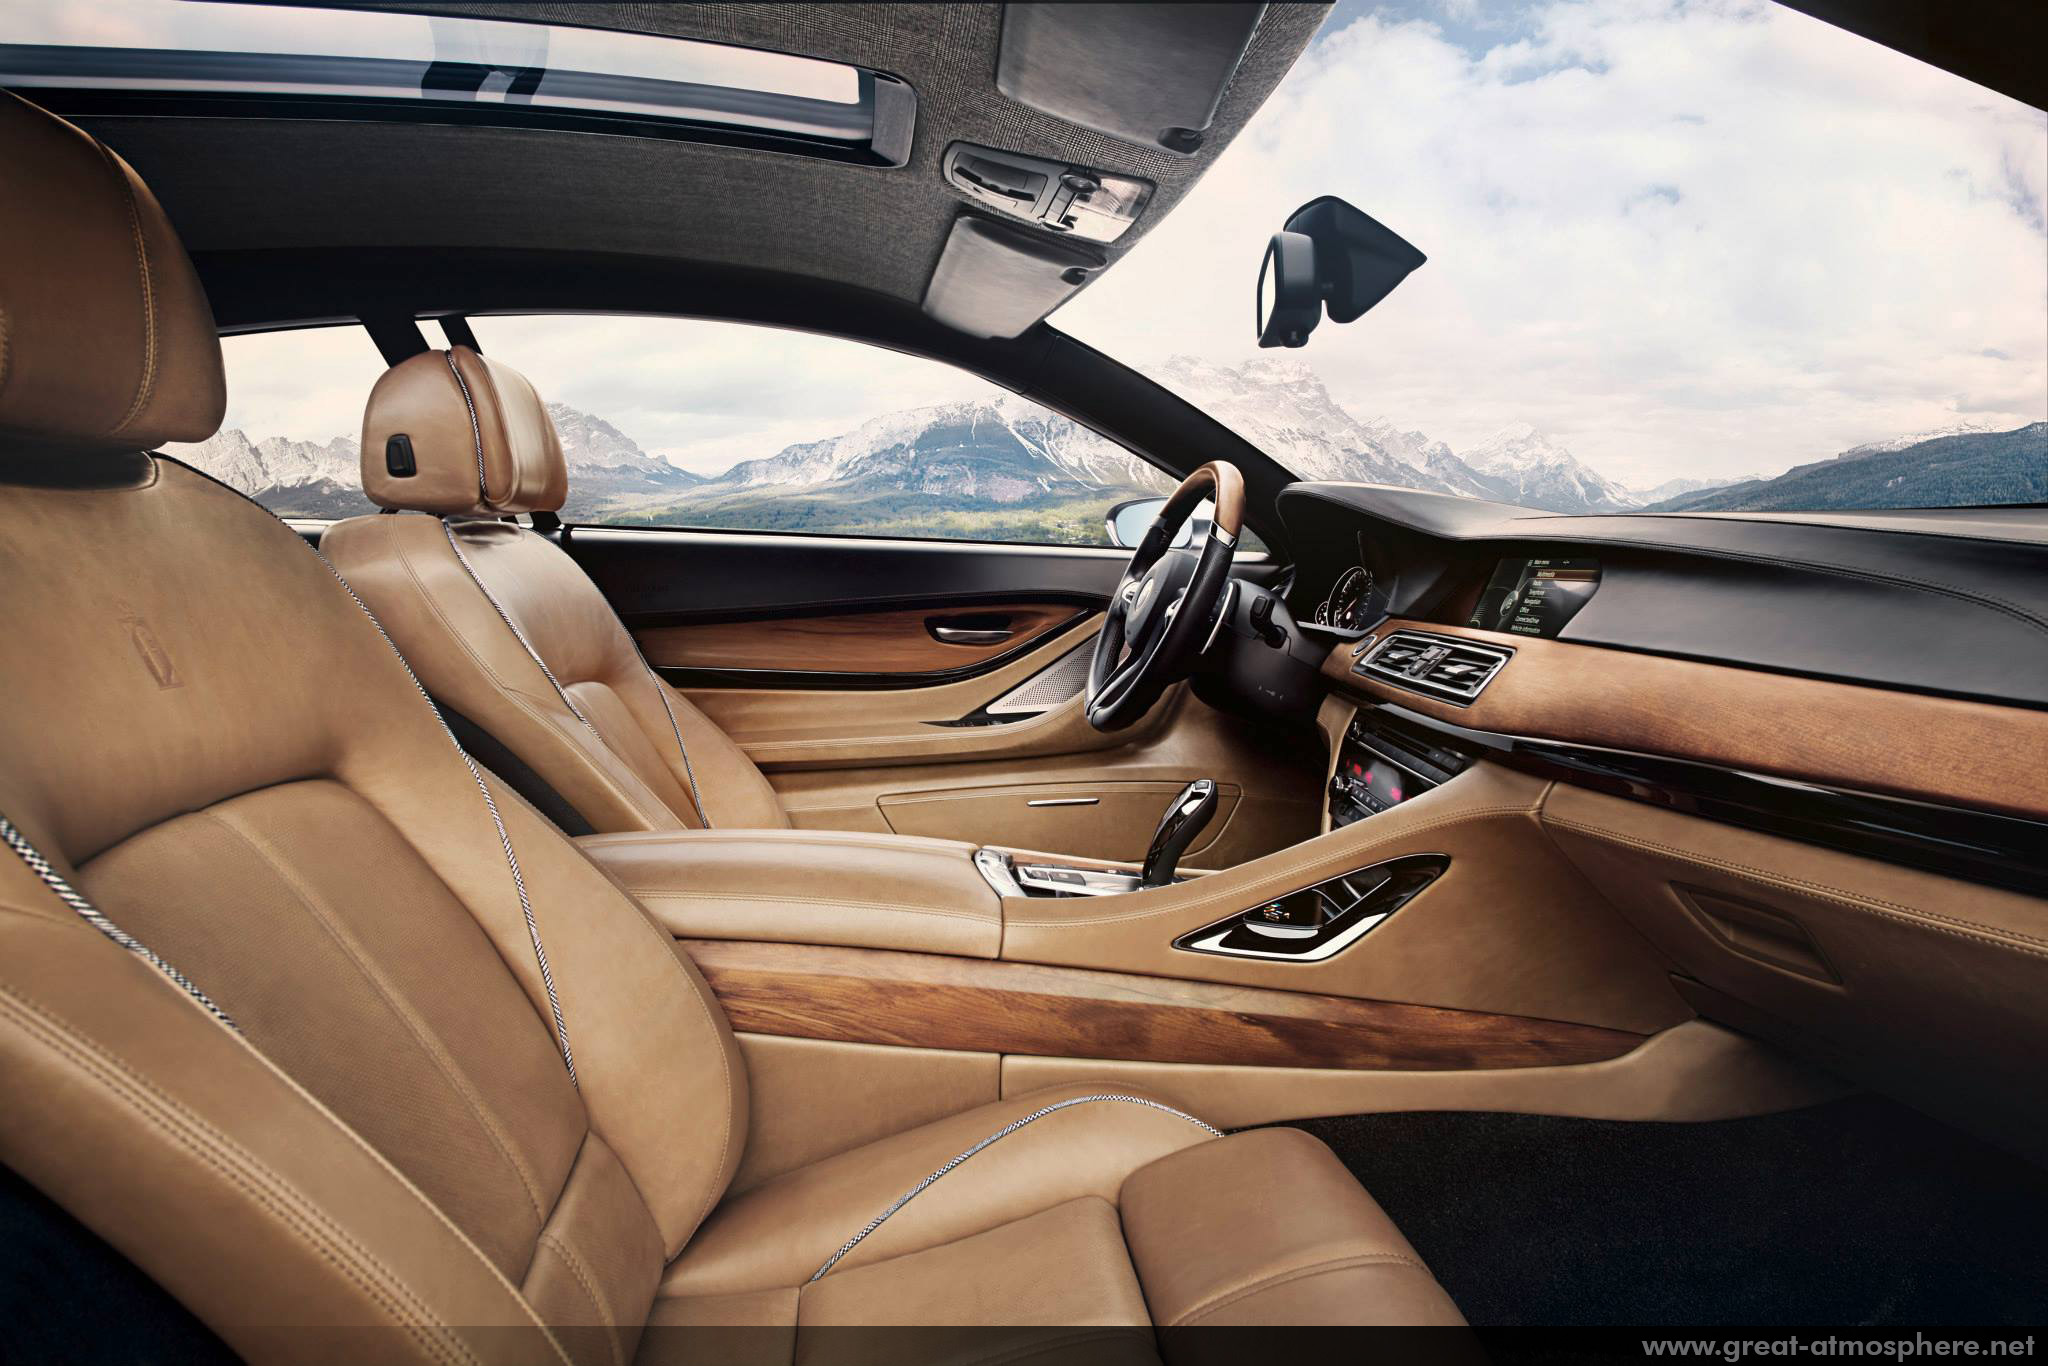 BMW-Pininfarina-Gran-Lusso-Coupe-great-atmosphere-amazing-car-2013